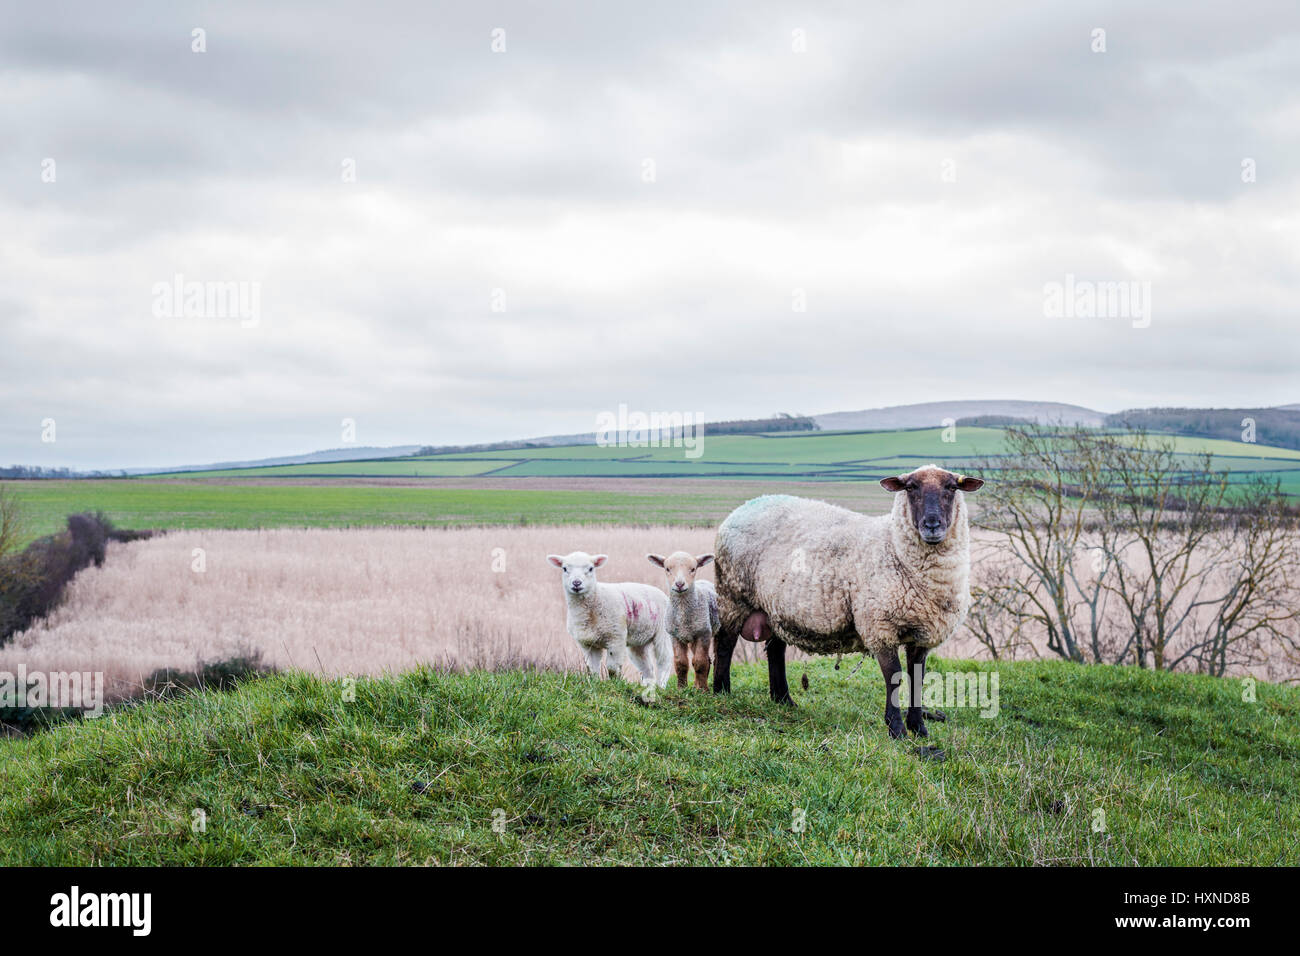 A sheep with lambs Stock Photo